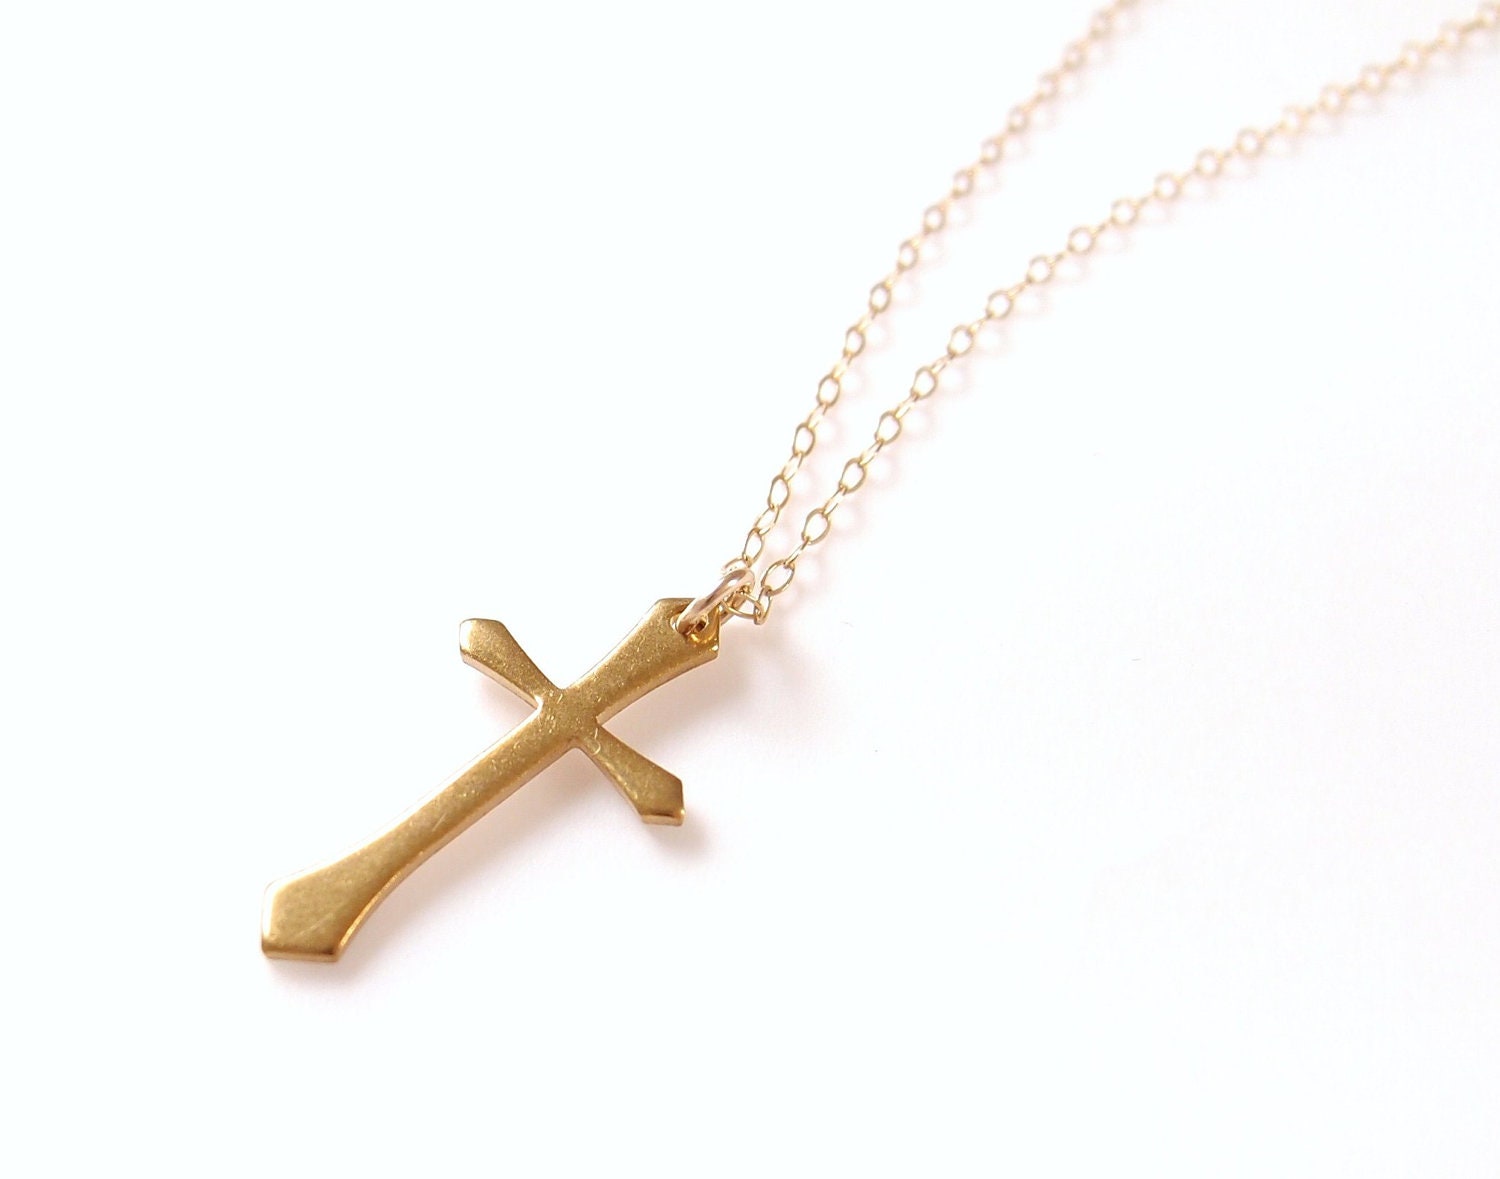 Guardian - Gold Cross Necklace - Brass Cross on Gold Filled Chain - Modern Minimal Jewelry